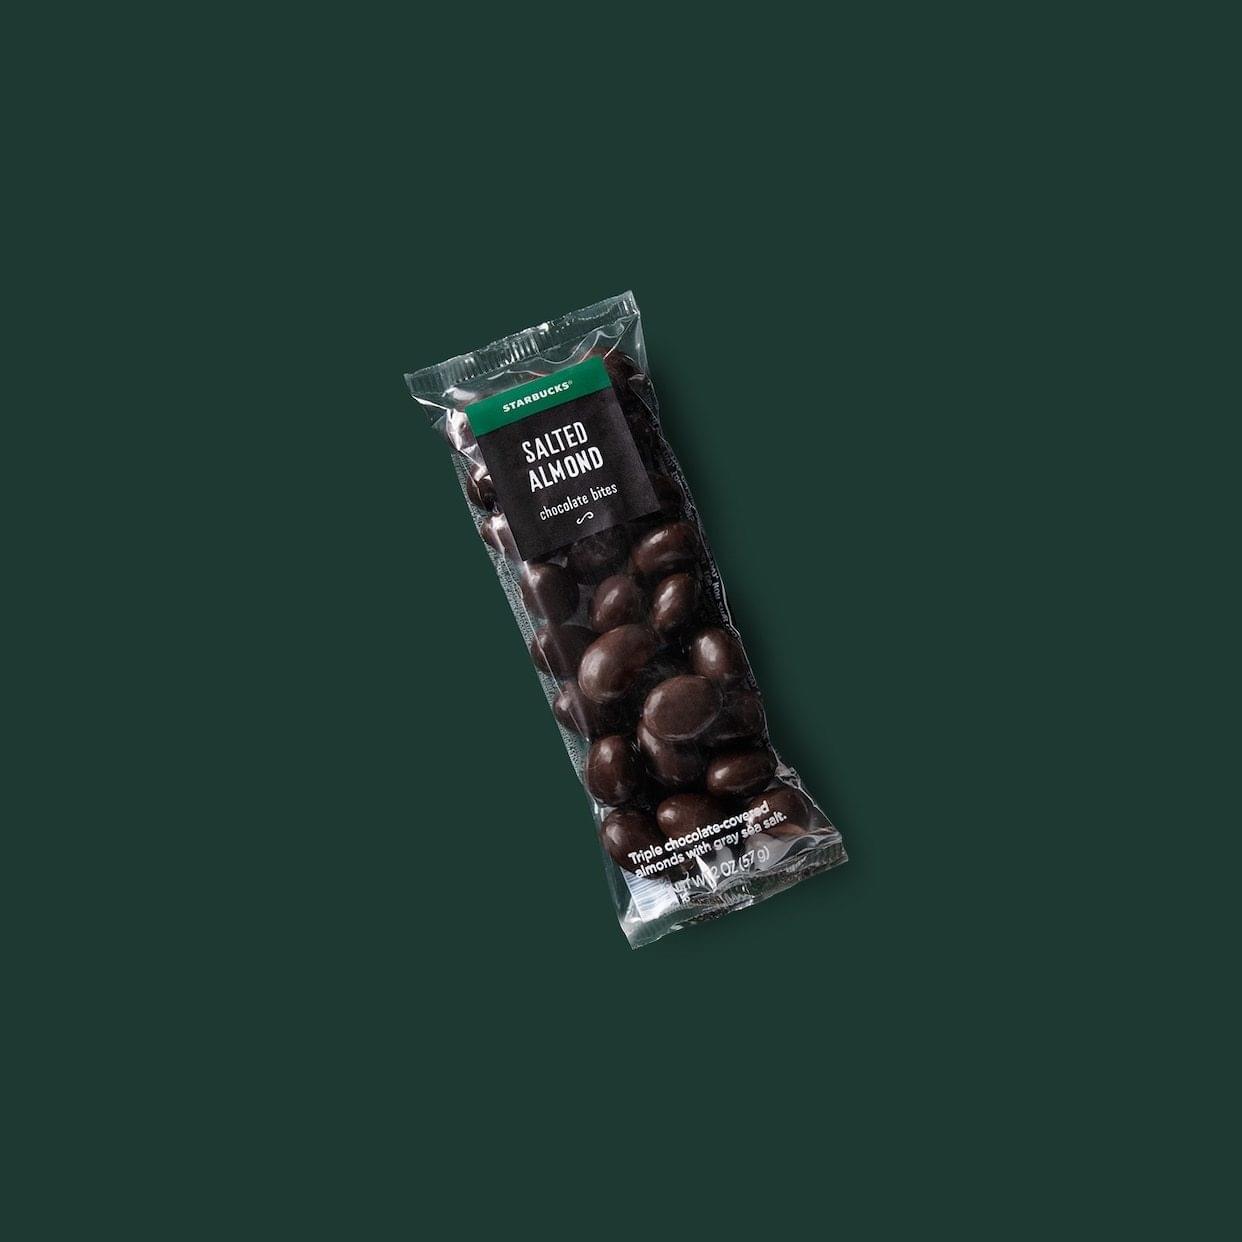 Starbucks Salted Almond Chocolate Bites Nutrition Facts